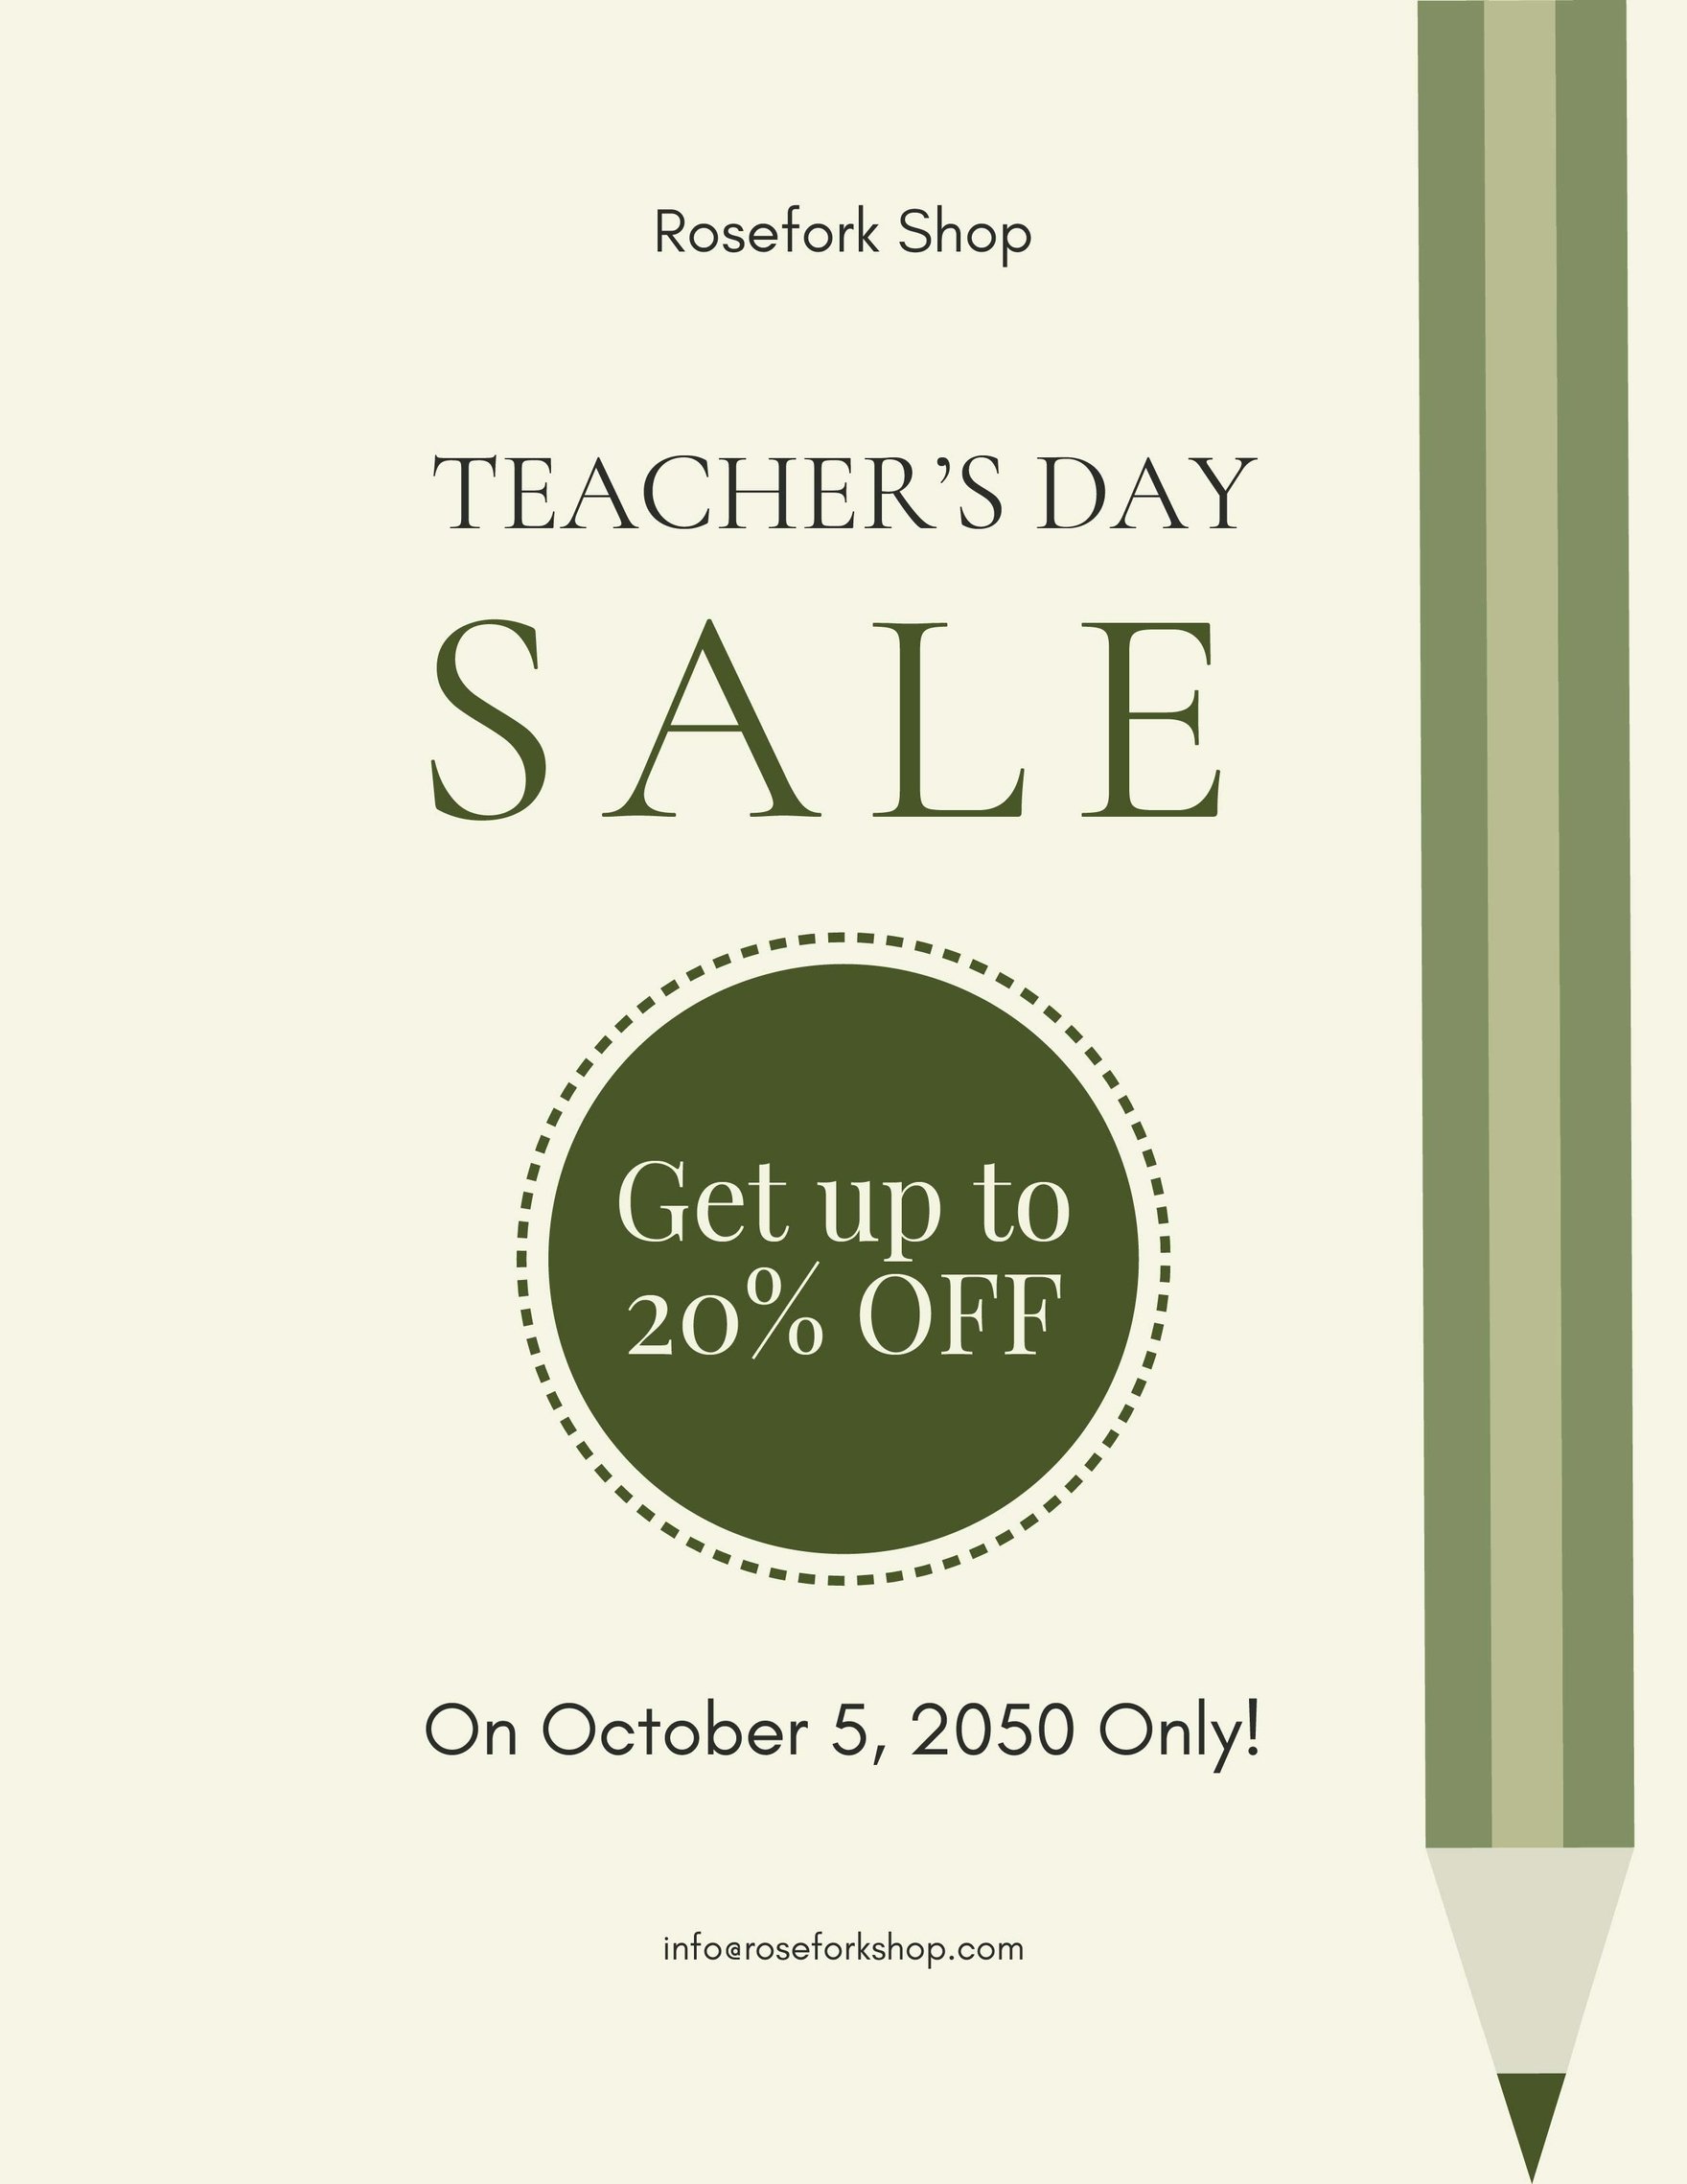 Free Teachers' Day Sale Flyer in Word, Google Docs, Illustrator, PSD, Apple Pages, Publisher